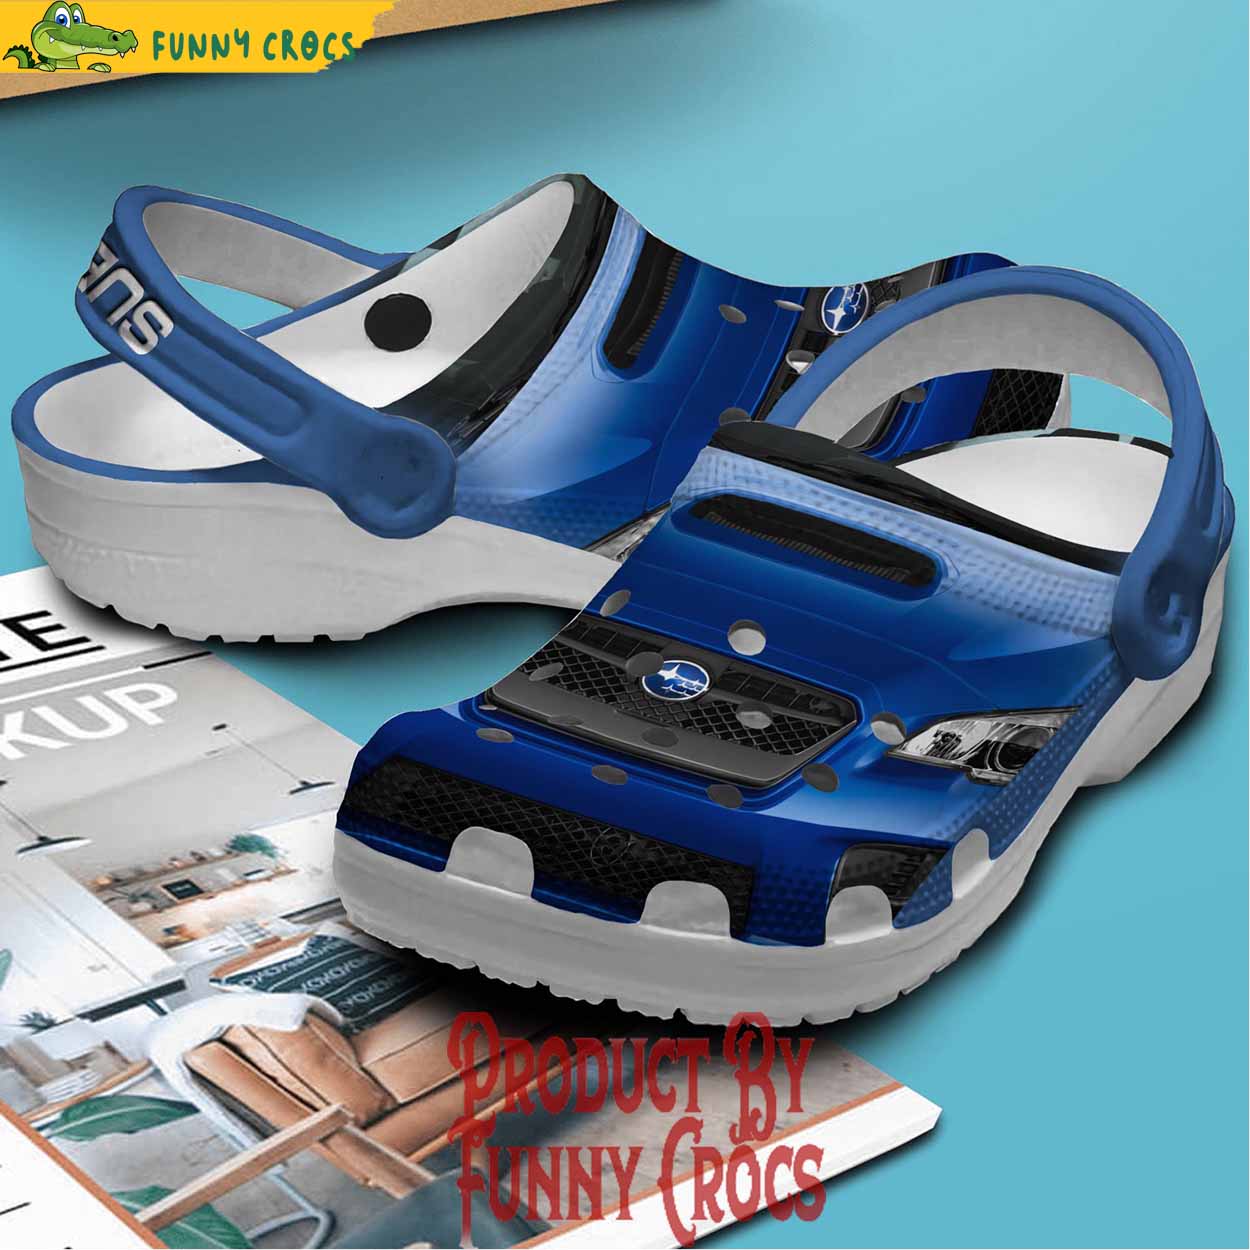 Car Subaru Crocs Shoes - Discover Comfort And Style Clog Shoes With ...